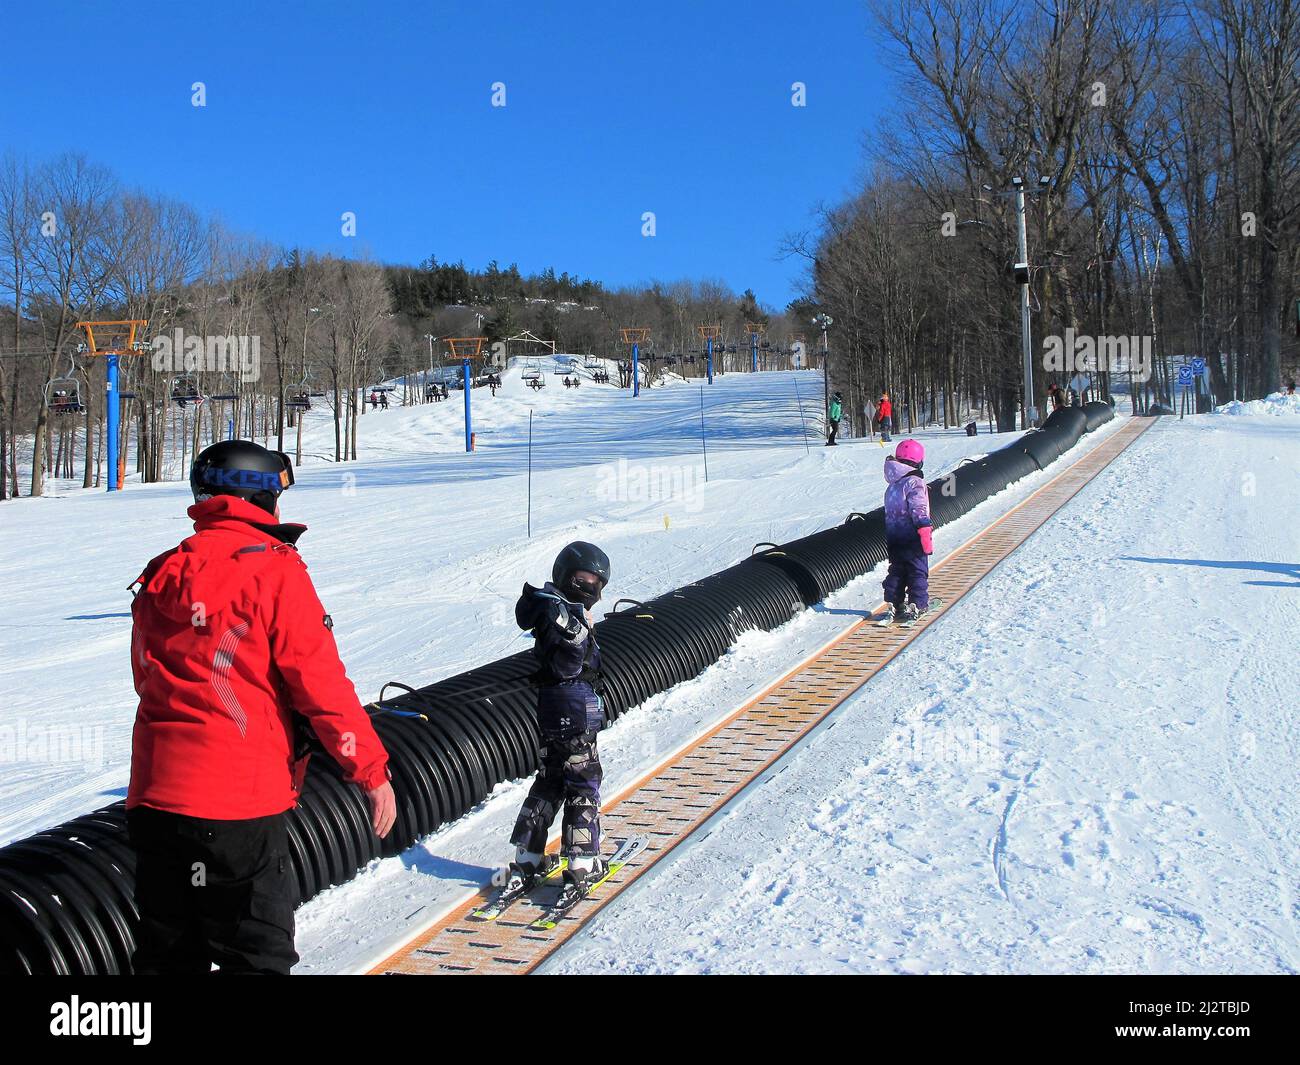 Family of skiers on a magic carpet on a ski hill Stock Photo